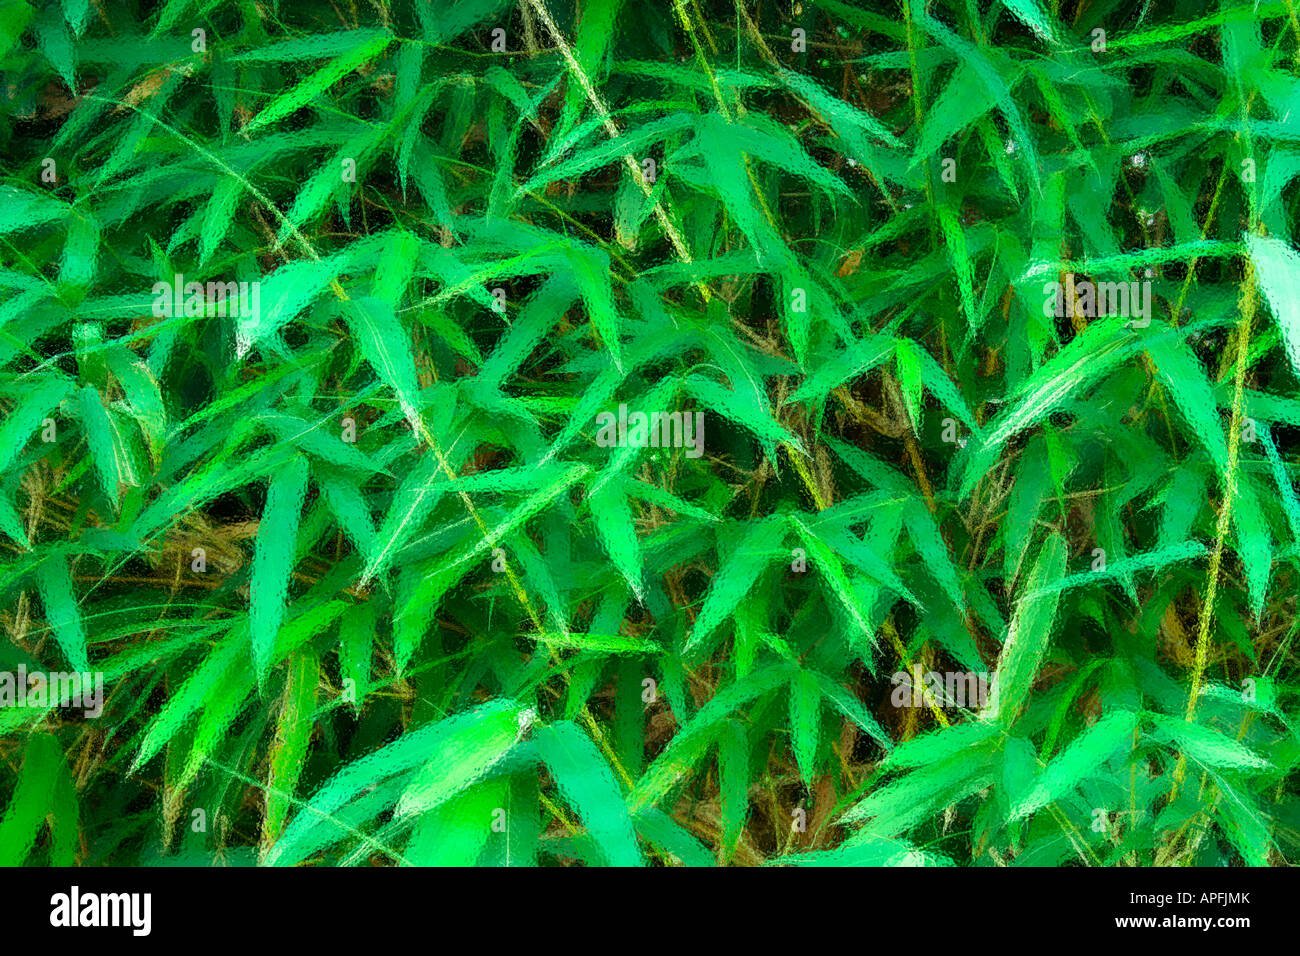 Bamboo leaves foliage background blurred diffused frosted glass Stock Photo